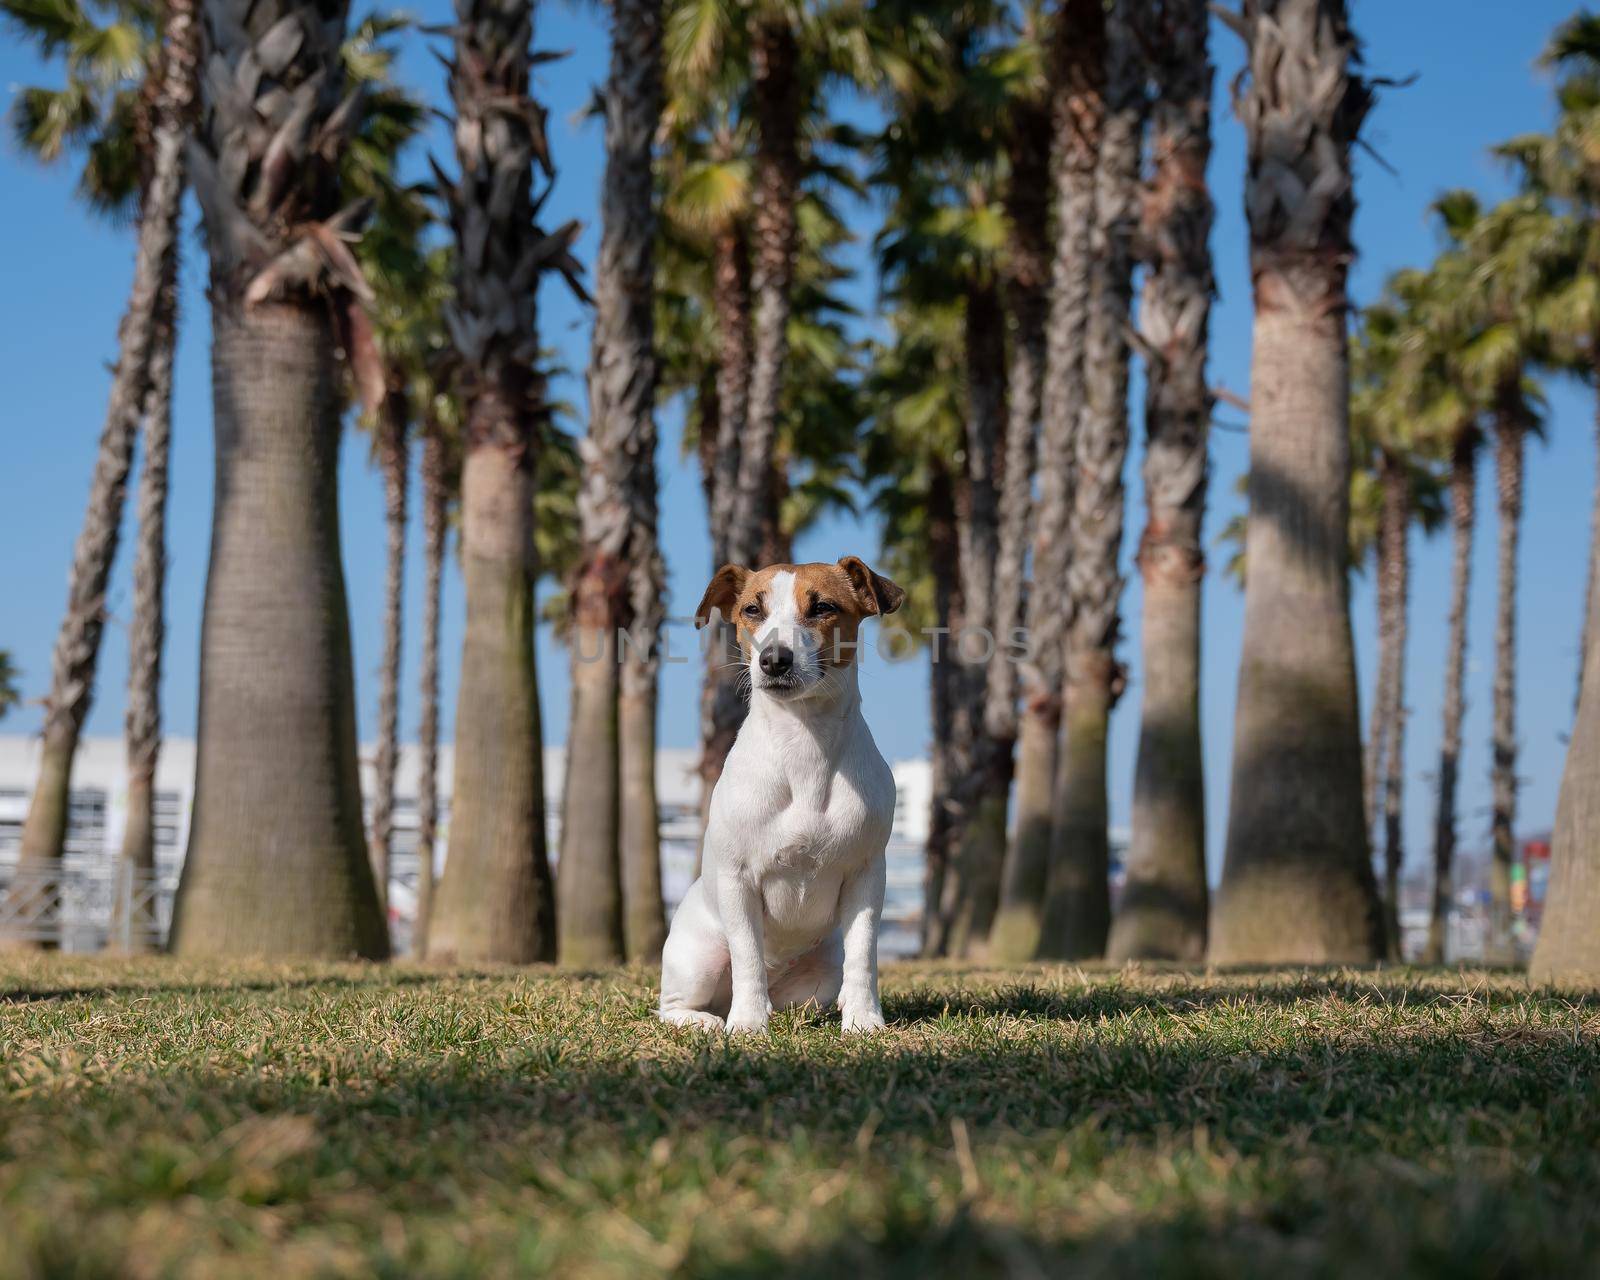 Jack Russell Terrier dog sitting under palm trees. by mrwed54